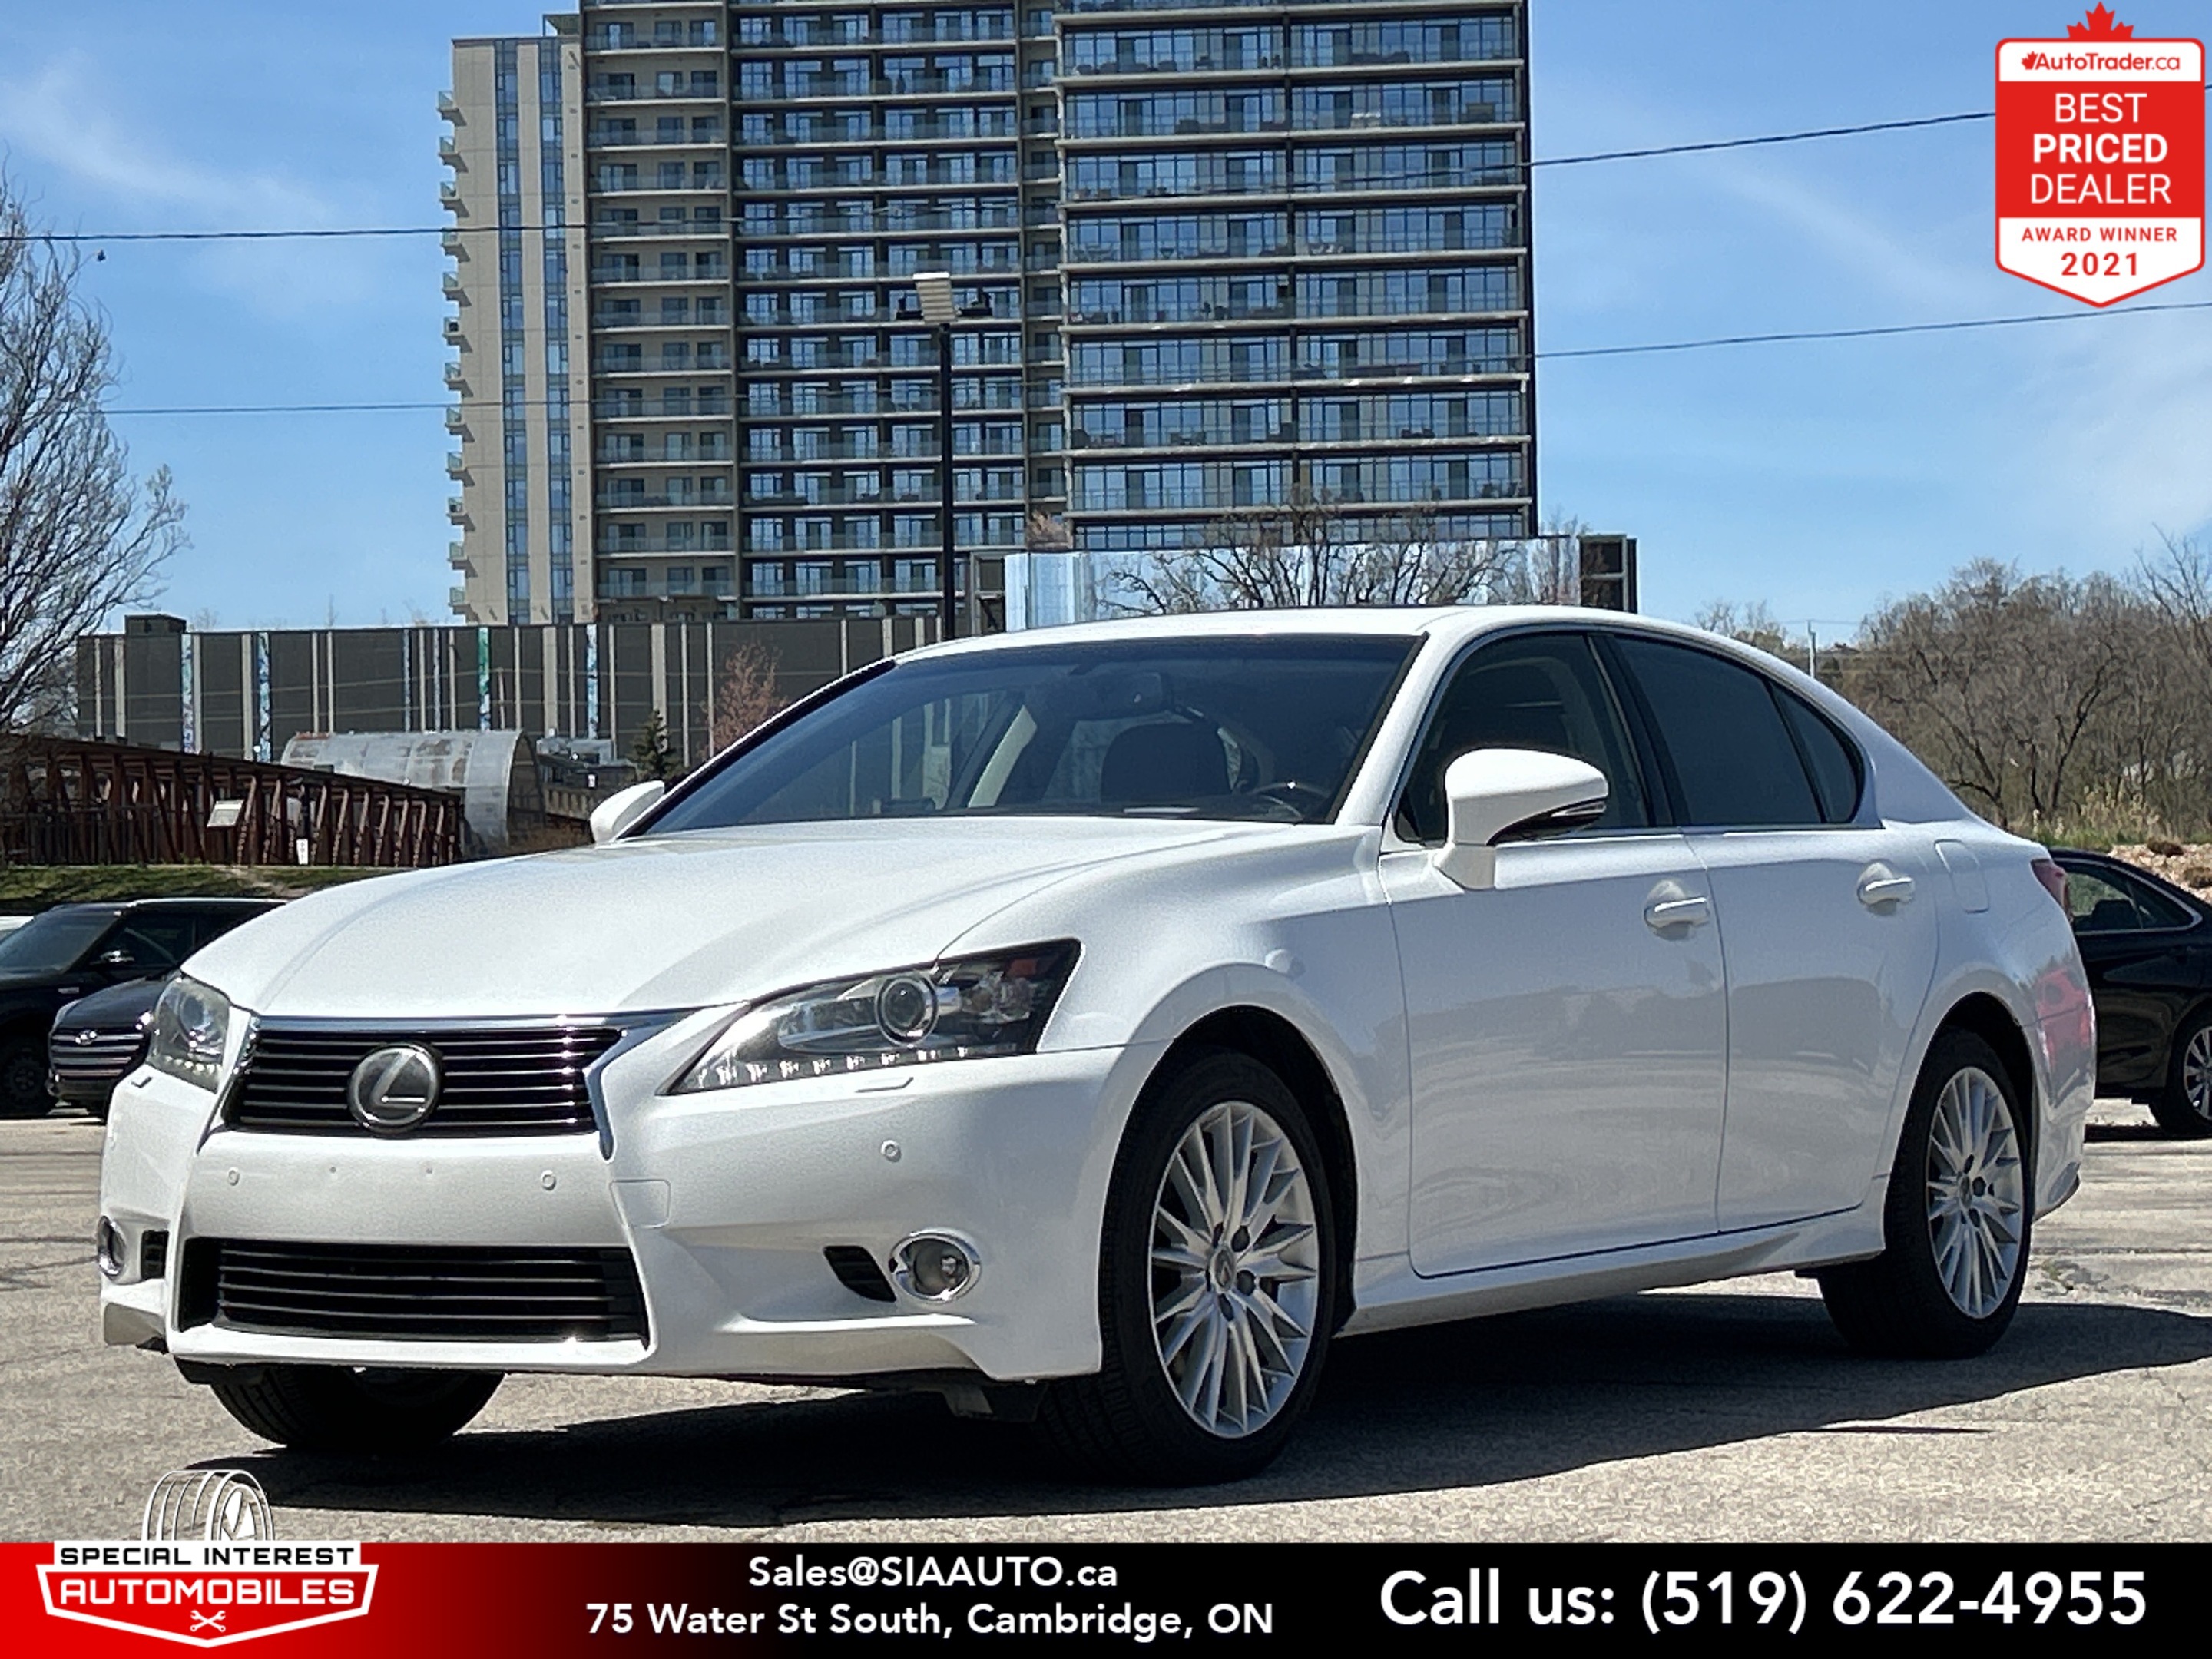 2013 Lexus GS 350 SOLD * SOLD * SOLD * SOLD